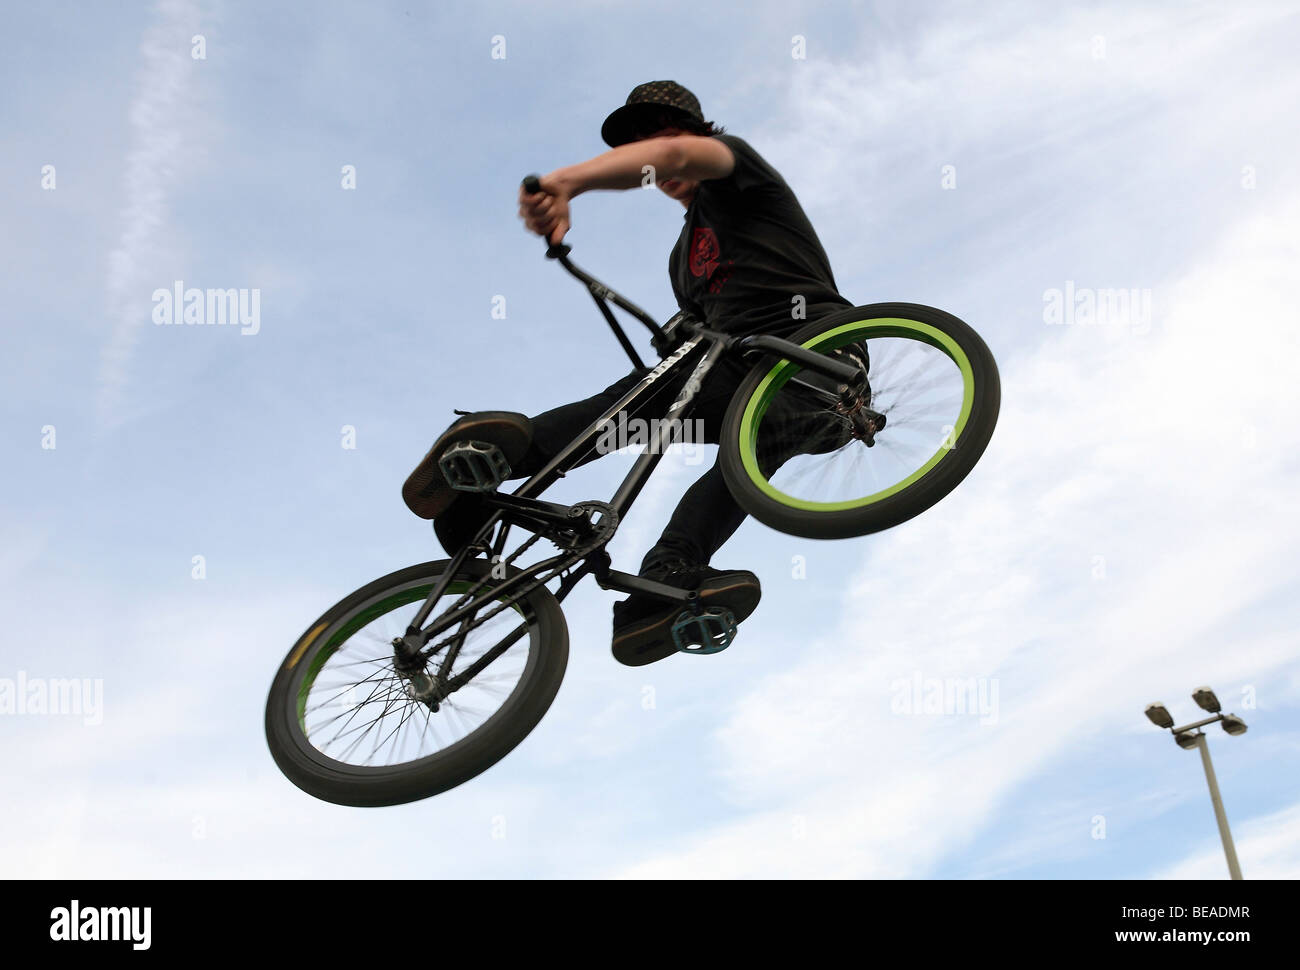 A biker jumping up in the air, Leipzig, Germany Stock Photo